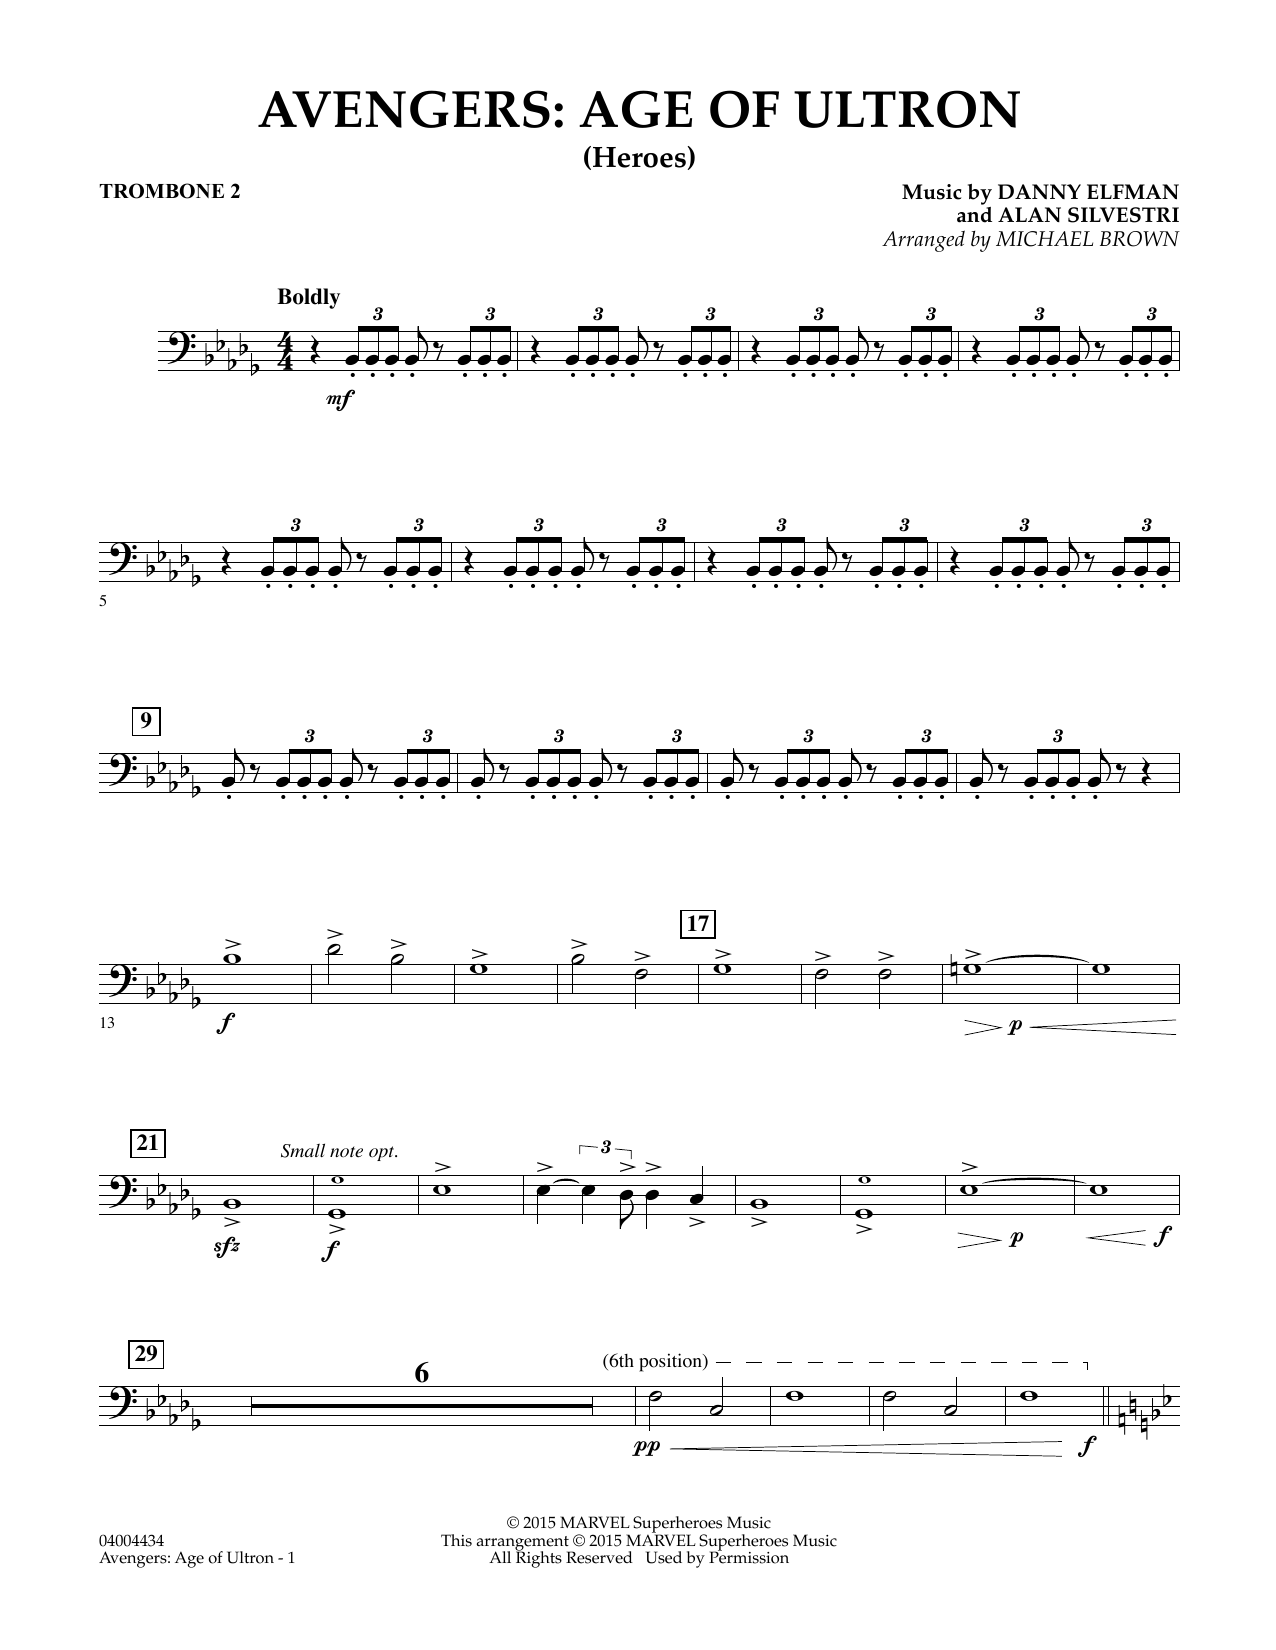 Michael Brown Avengers: The Age of Ultron (Main Theme) - Trombone 2 sheet music notes and chords. Download Printable PDF.